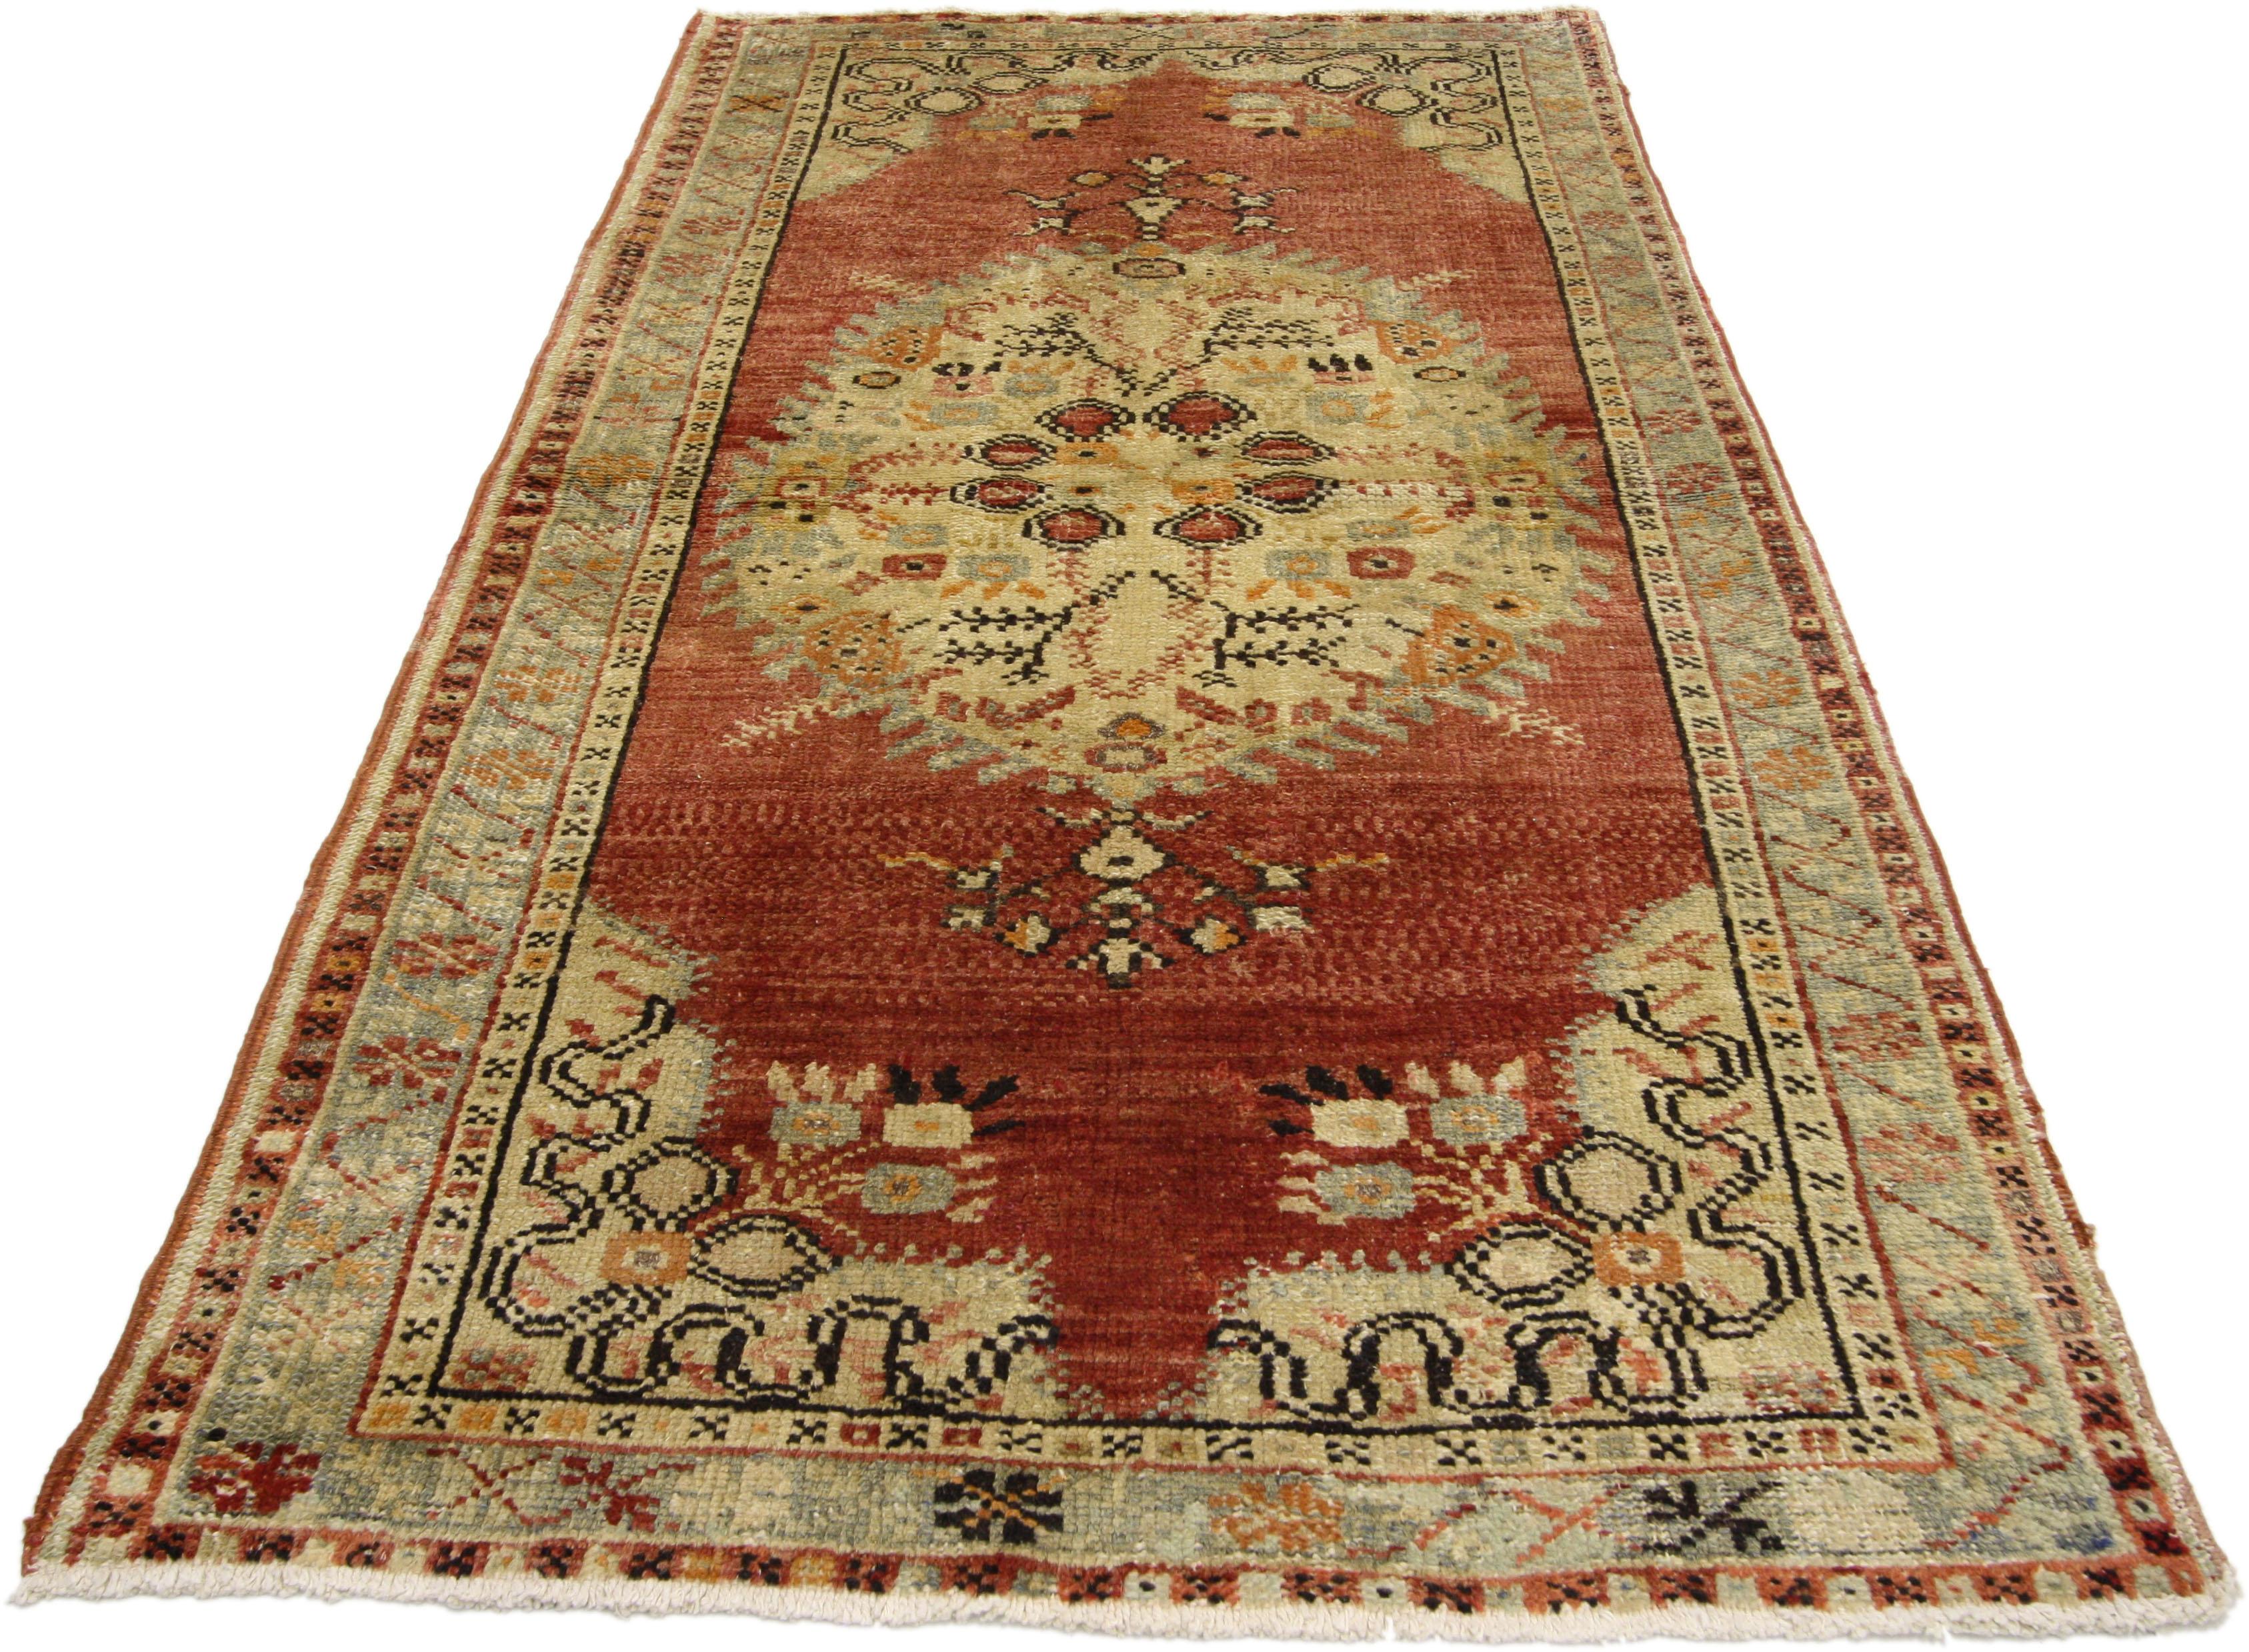 50911, Vintage Turkish Oushak Accent Rug, Entry or Foyer Rug with Rustic Bungalow Style. This vintage Turkish Oushak rug features a modern traditional style. Immersed in Anatolian history and refined colors, this vintage Oushak rug combines